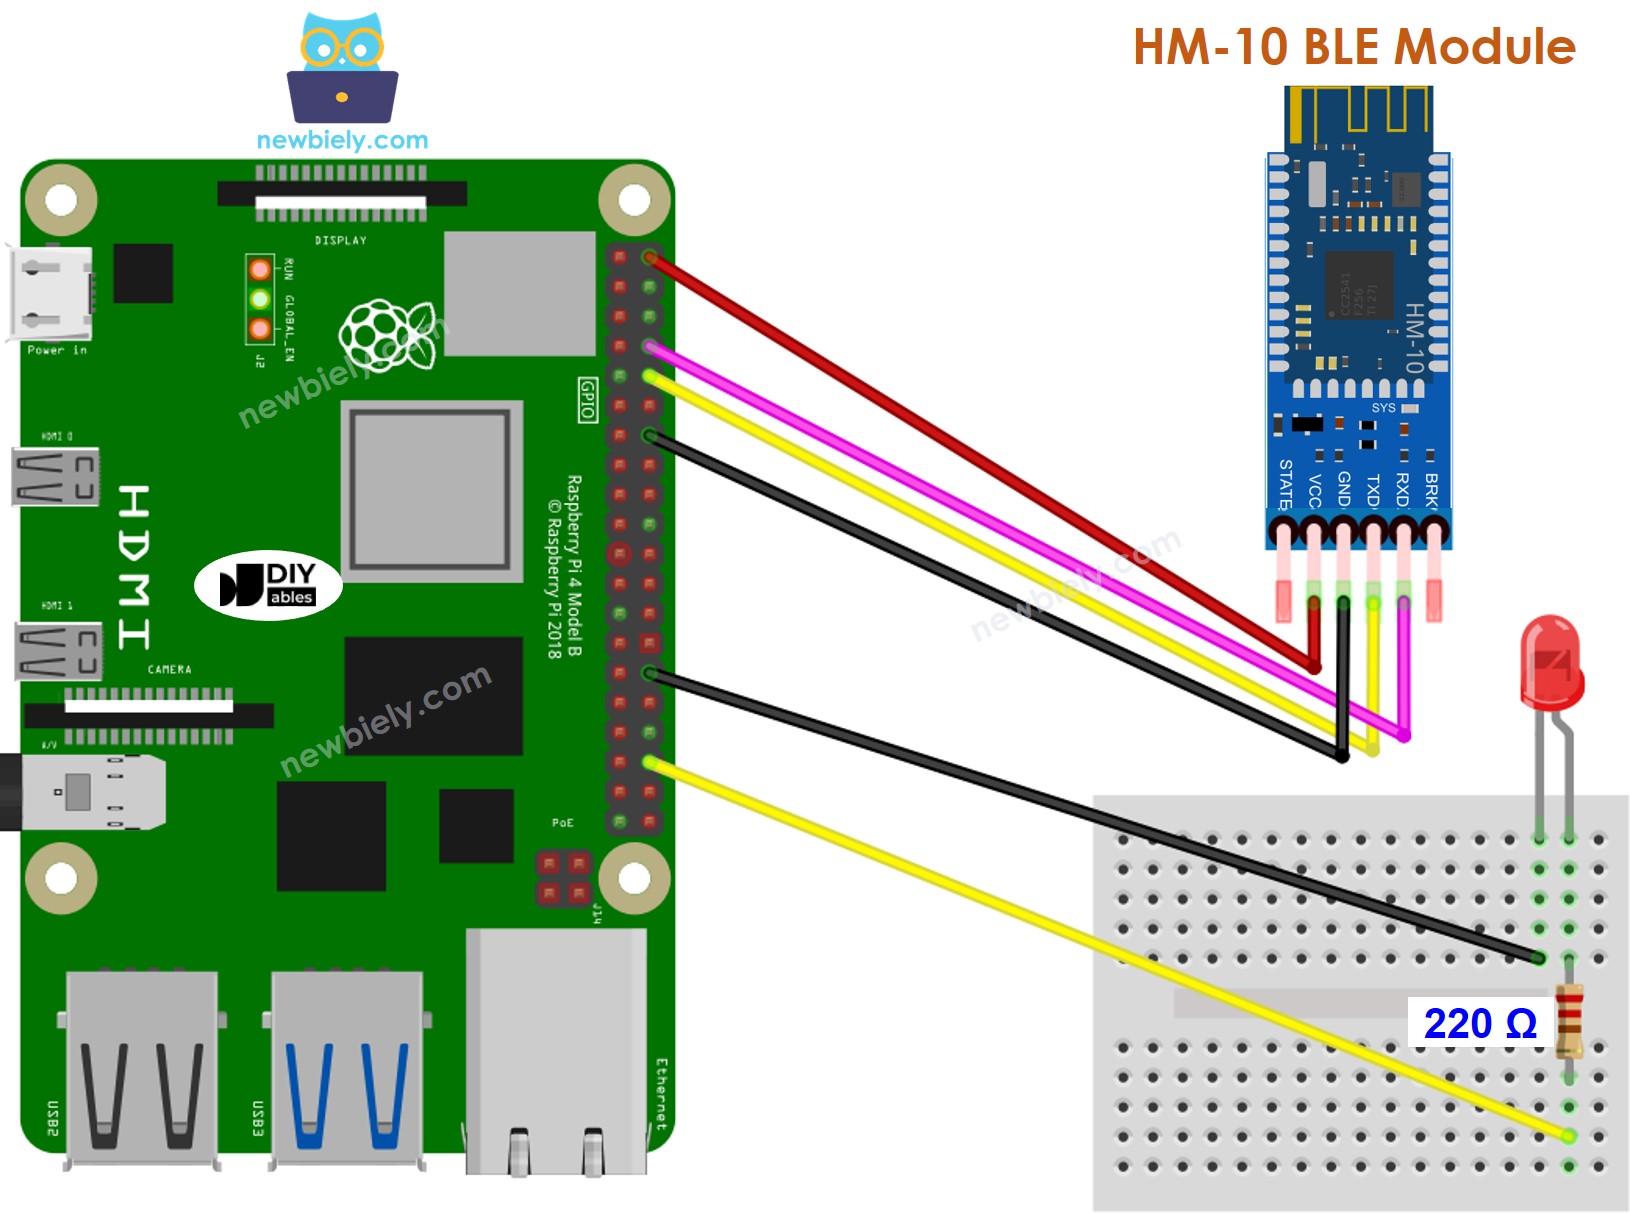 The wiring diagram between Raspberry Pi and LED BLE